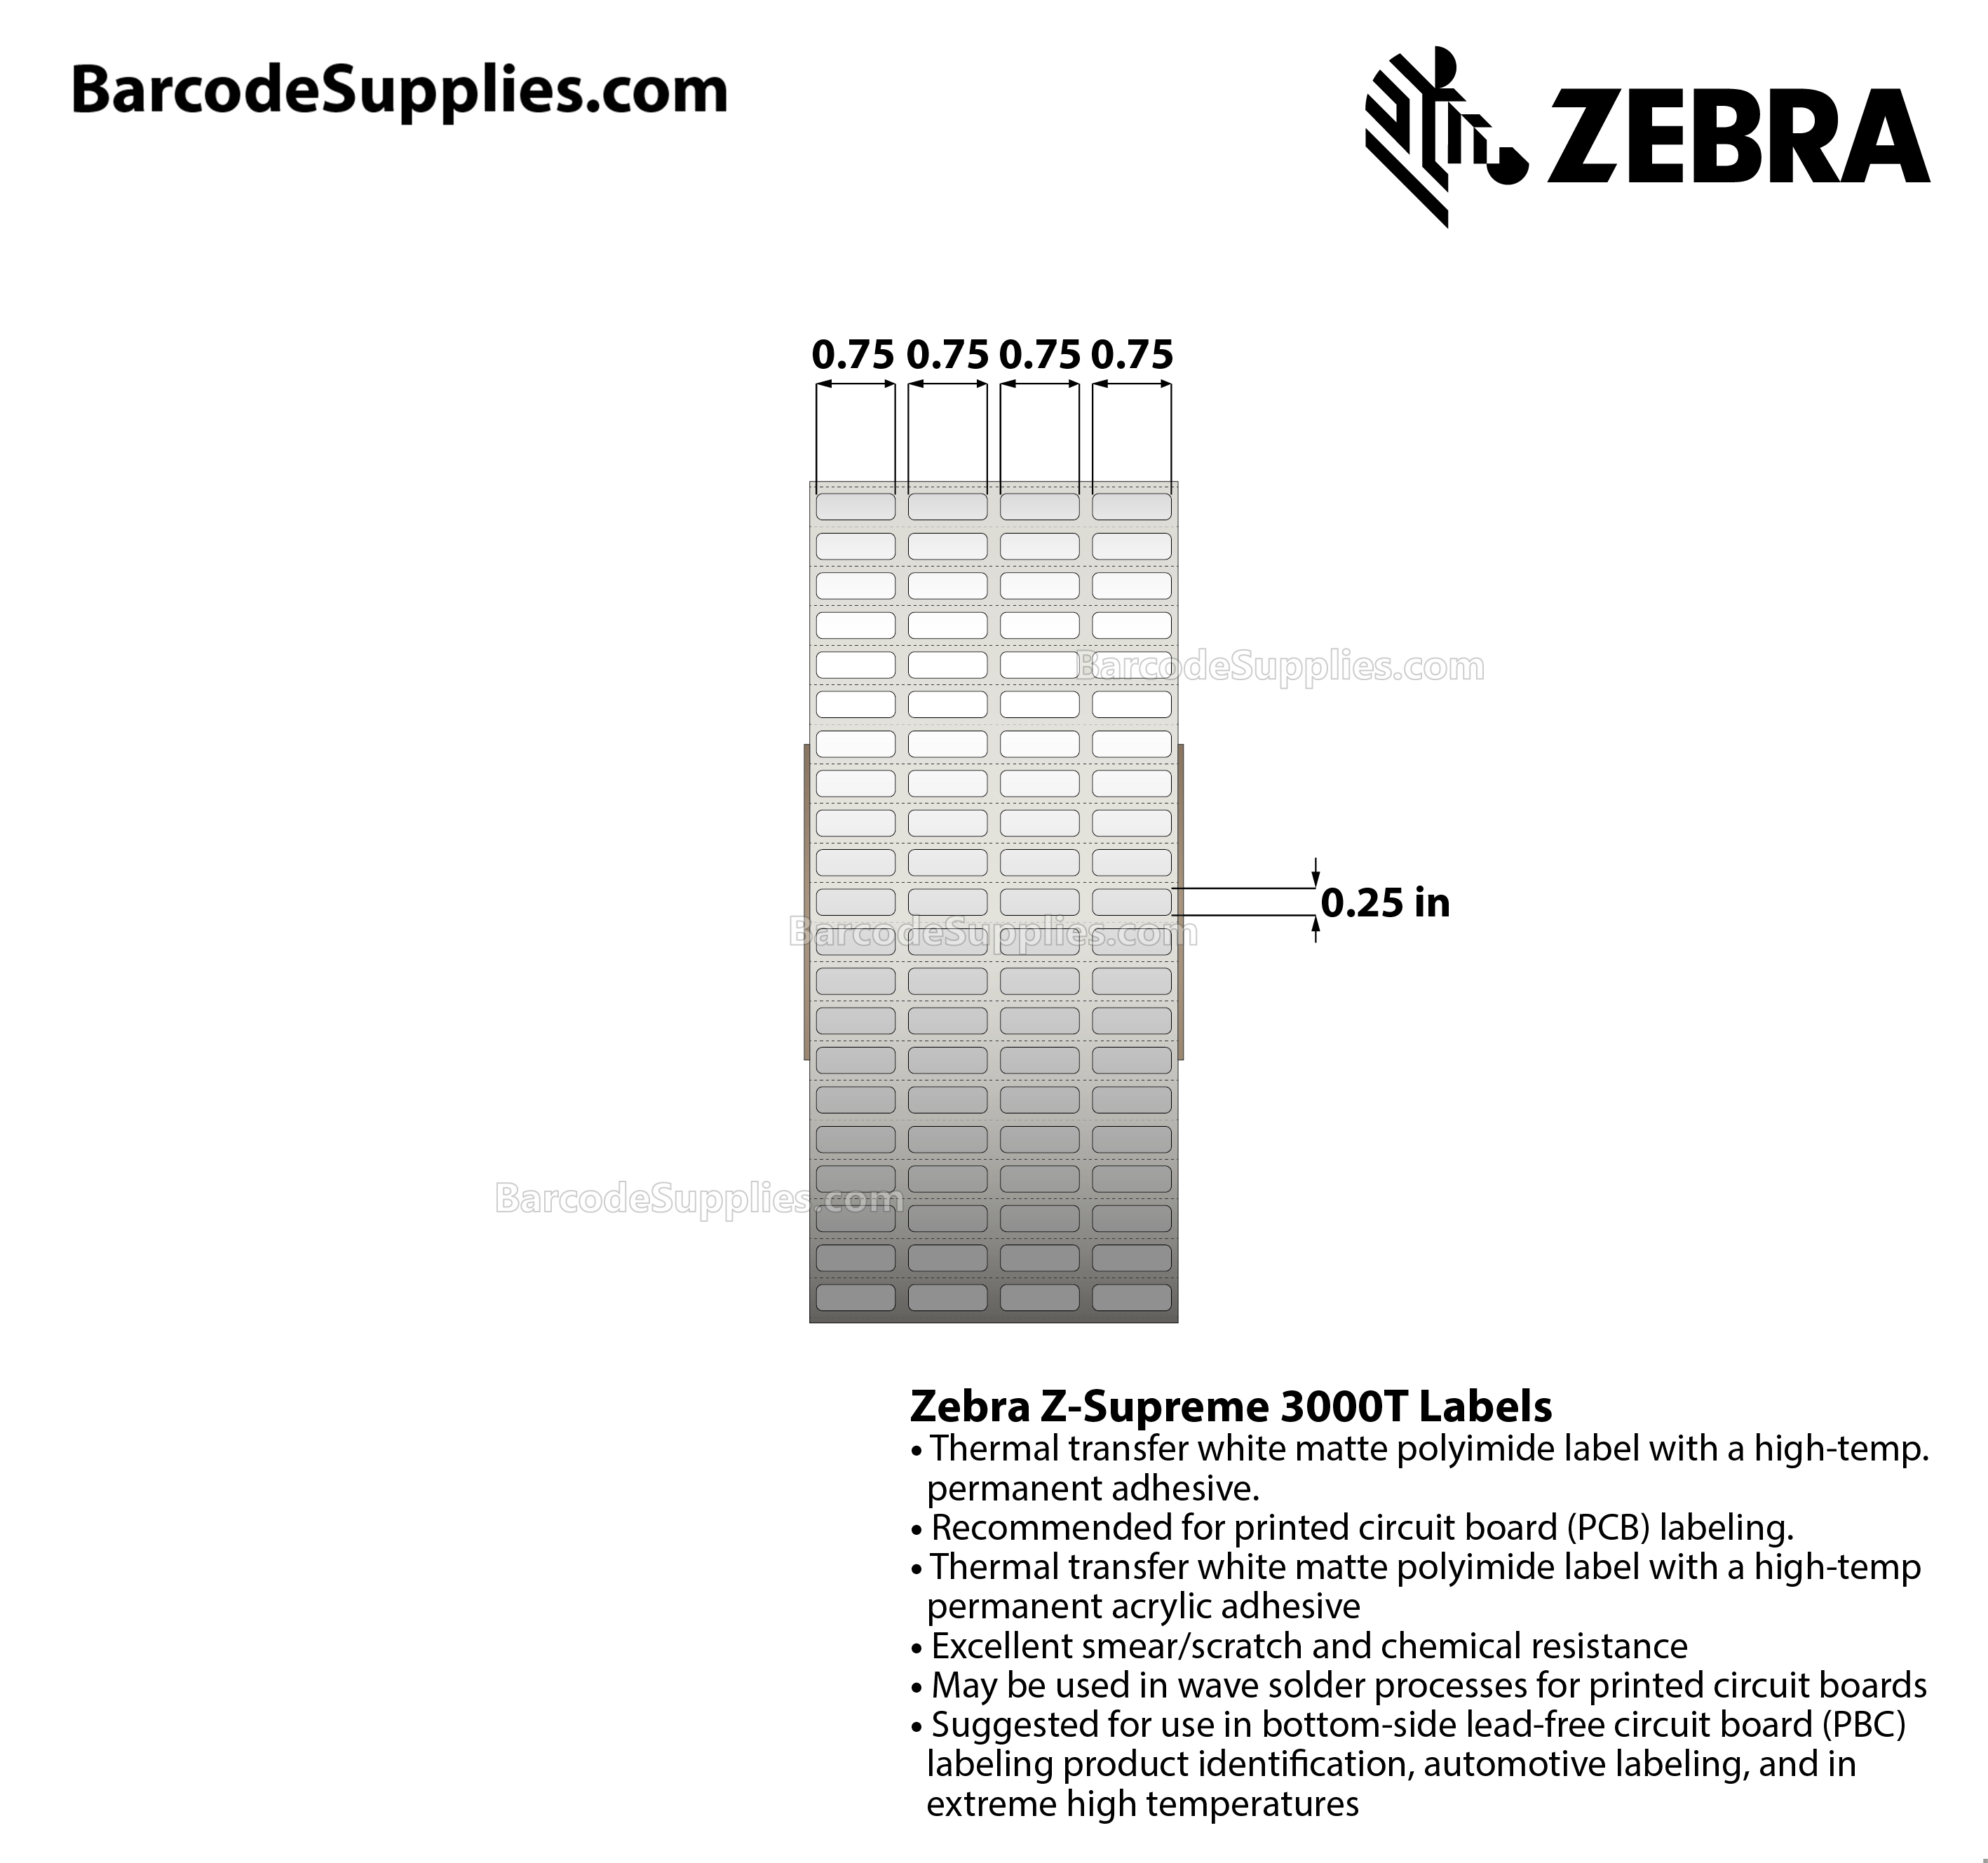 0.75 x 0.25 Thermal Transfer White Z-Supreme 3000T (4-Across) Labels With Permanent Adhesive - Perforated - 10000 Labels Per Roll - Carton Of 1 Rolls - 10000 Labels Total - MPN: 10023225